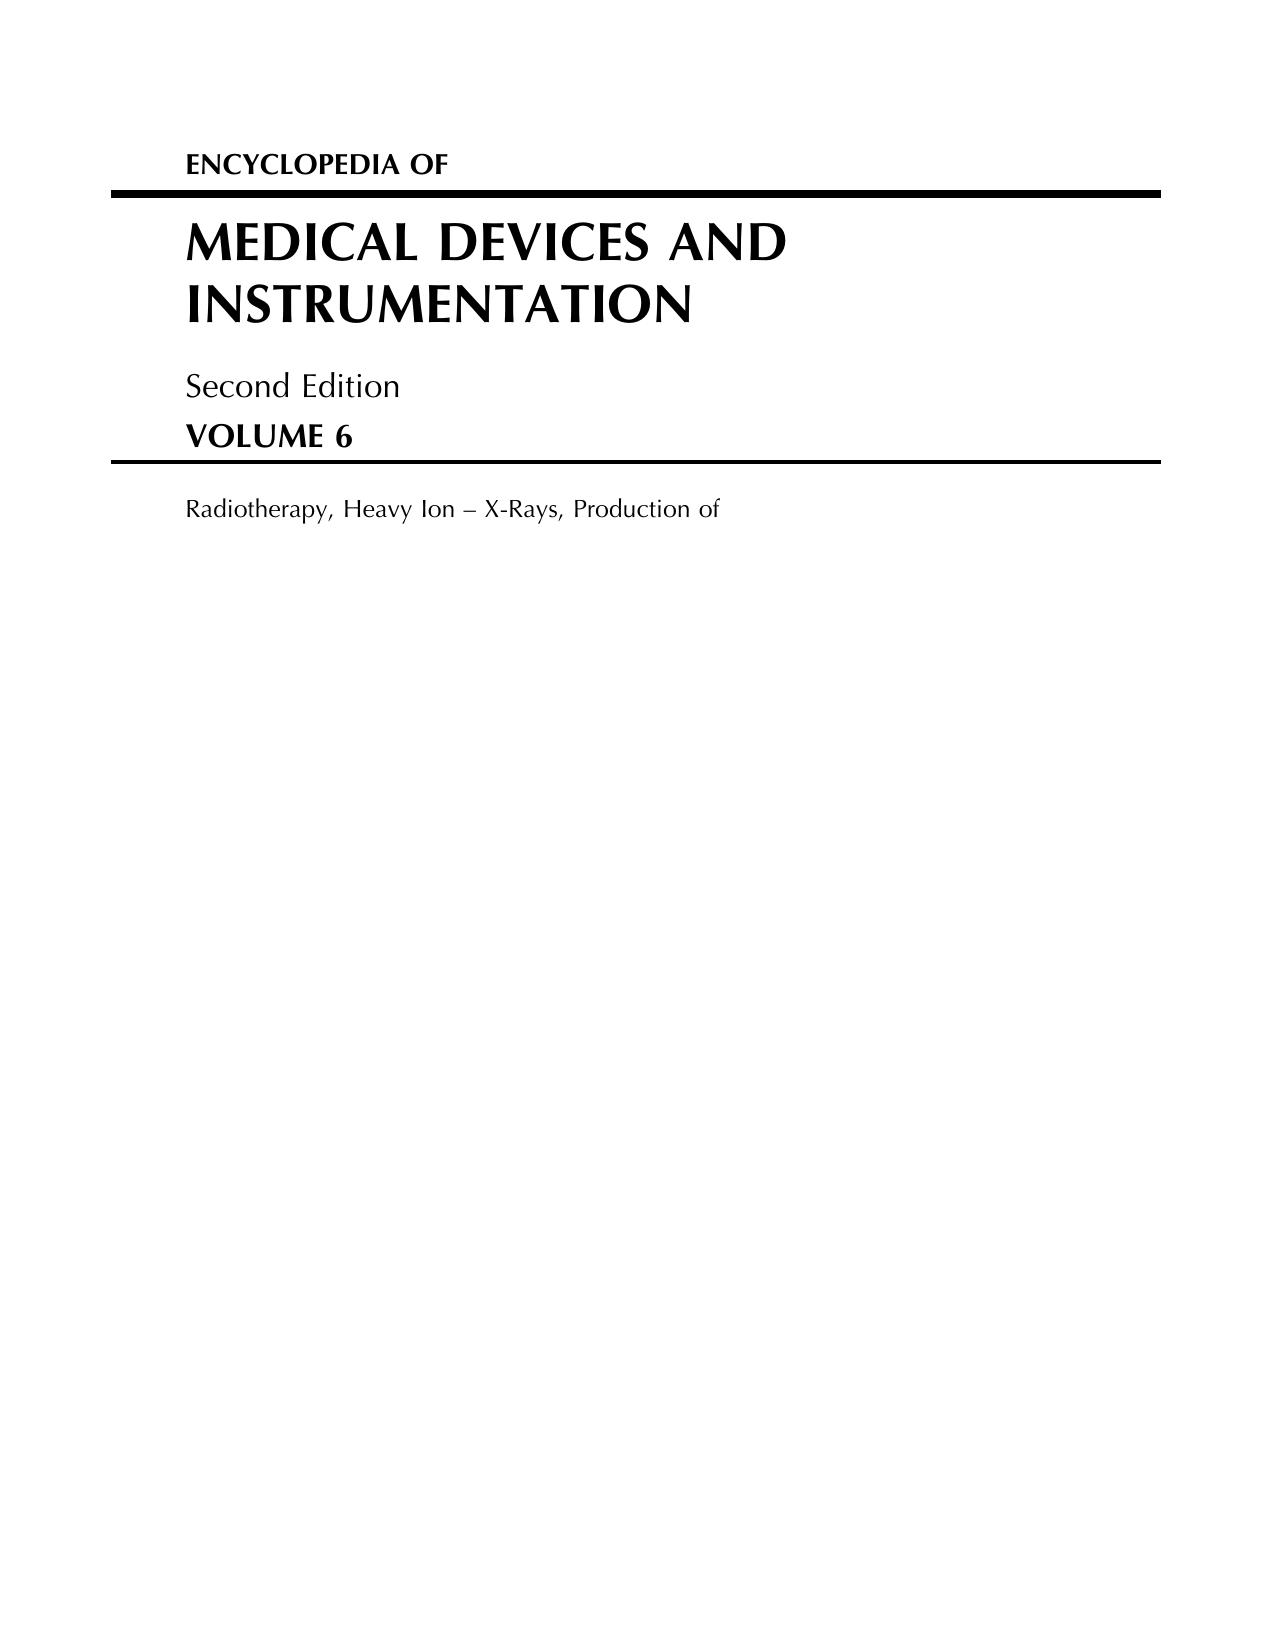 ENCYCLOPEDIA OF MEDICAL DEVICES Vol 6 2nd ed 2006